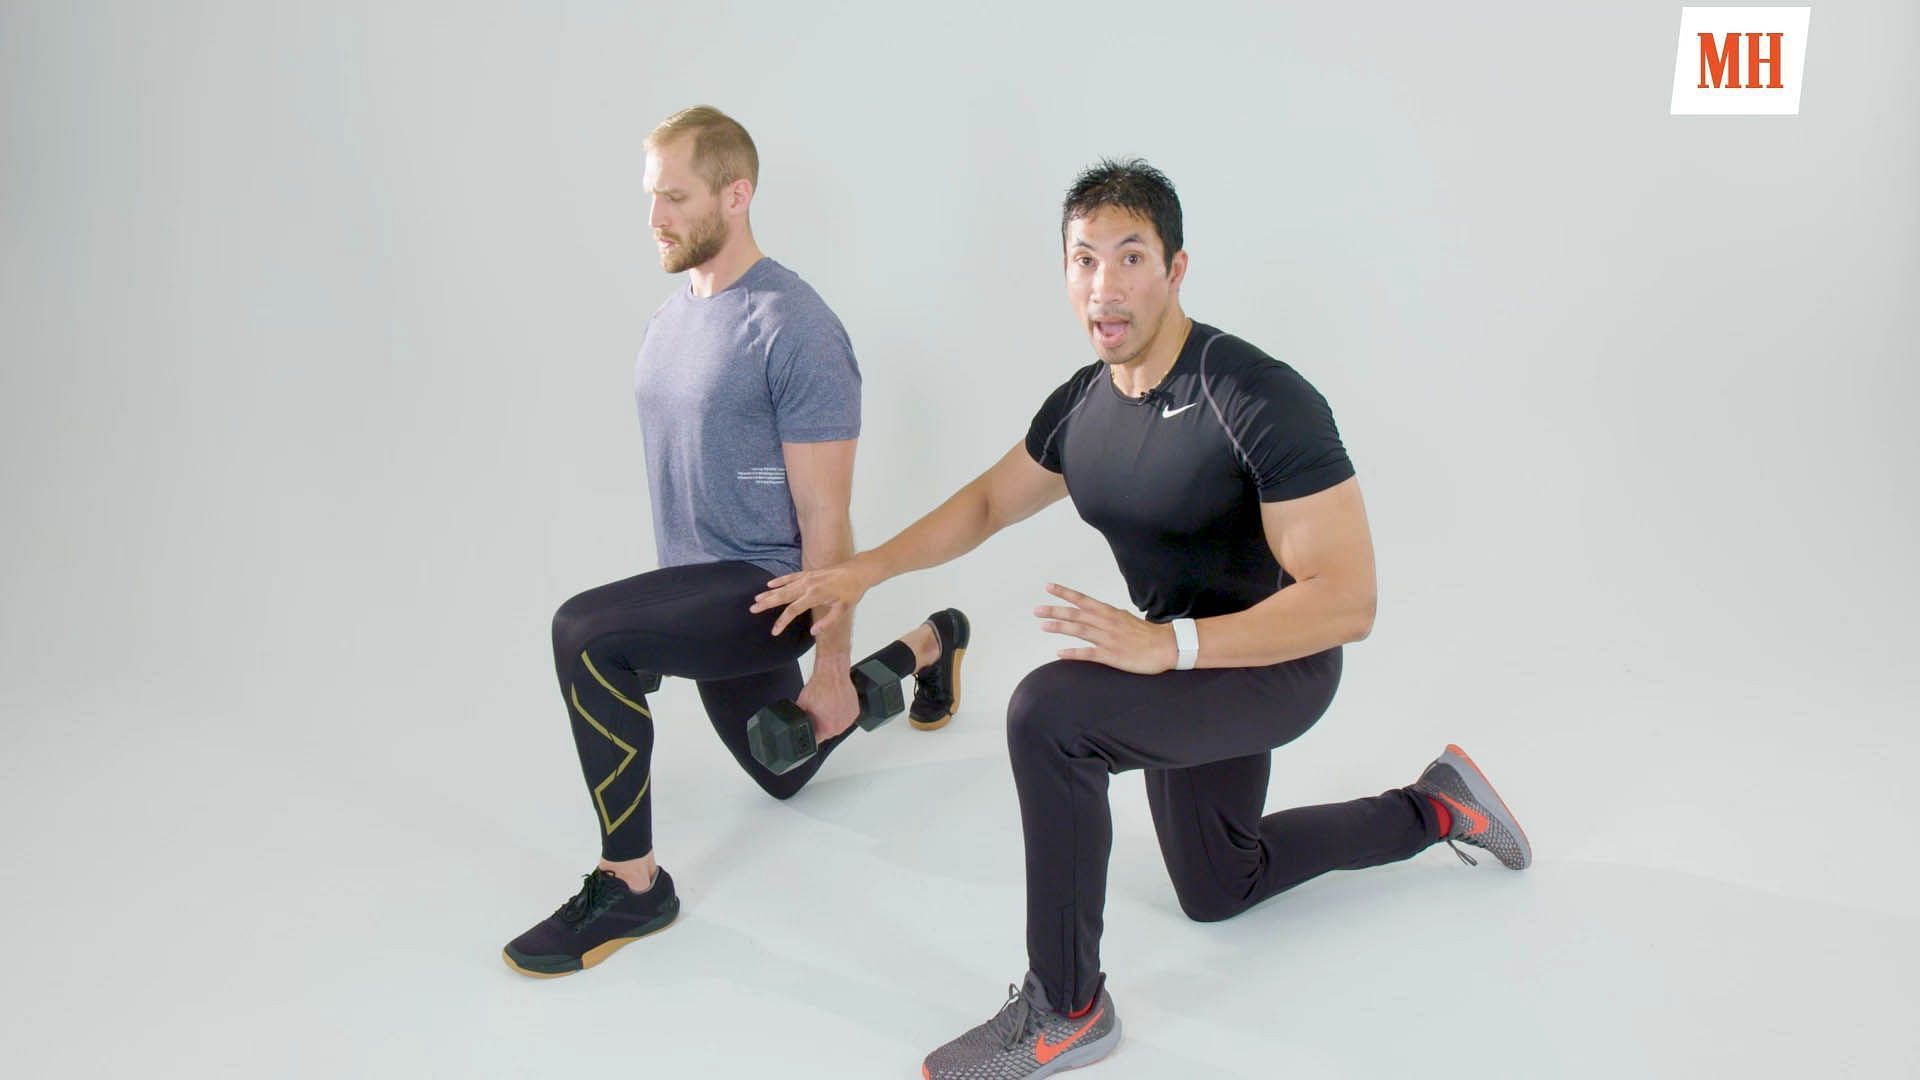 Try lunge variations for stronger legs.